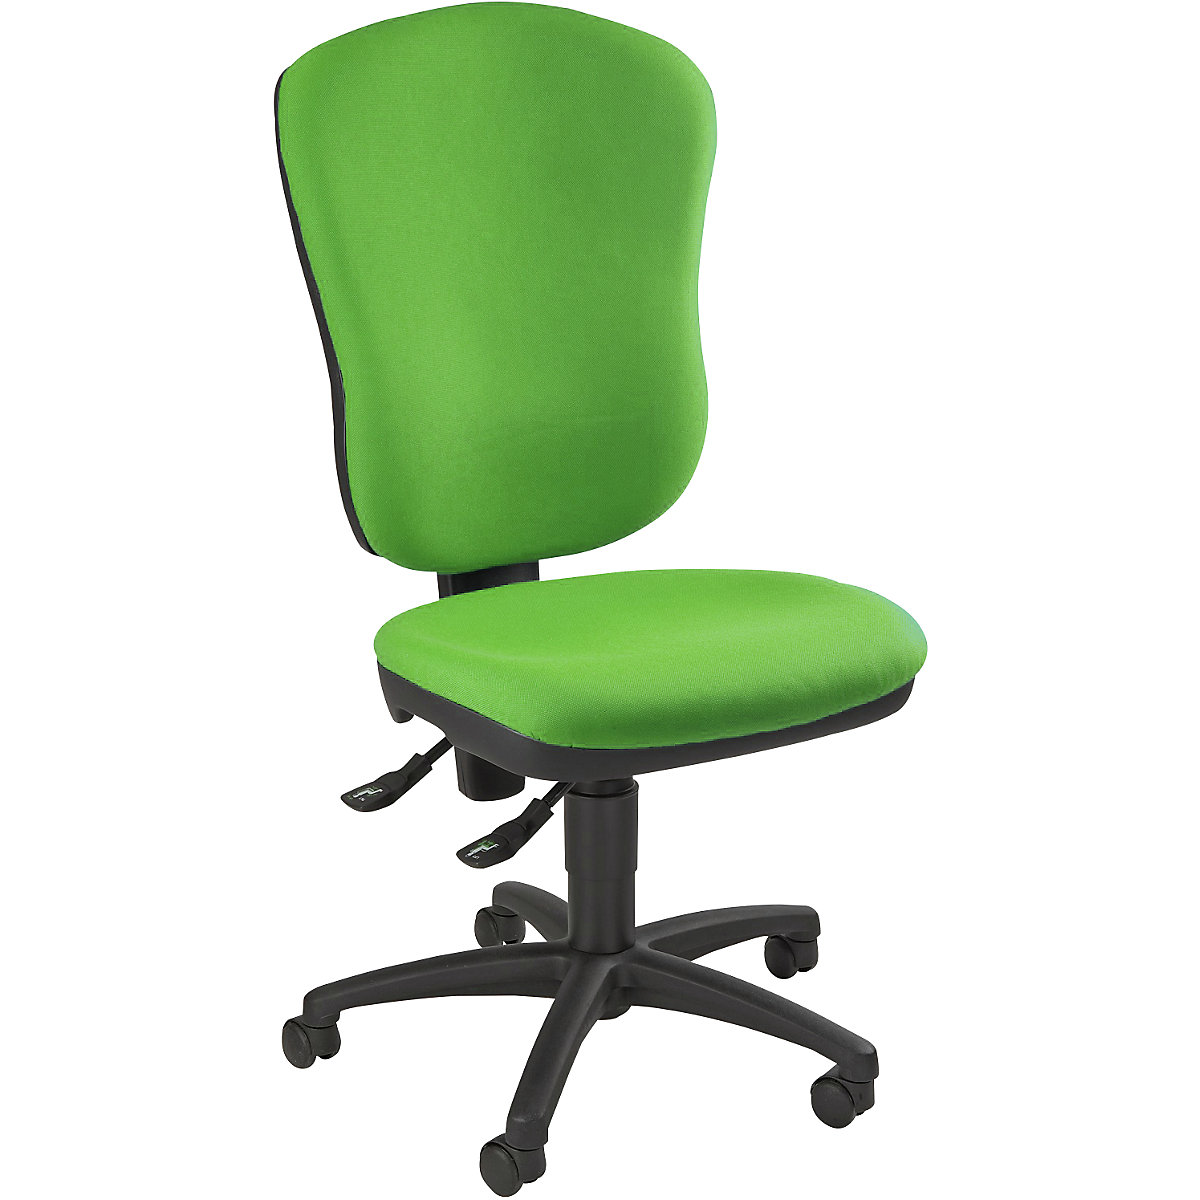 Standard swivel chair – Topstar, without arm rests, with lumbar support, back rest height 570 mm, apple green covering-5